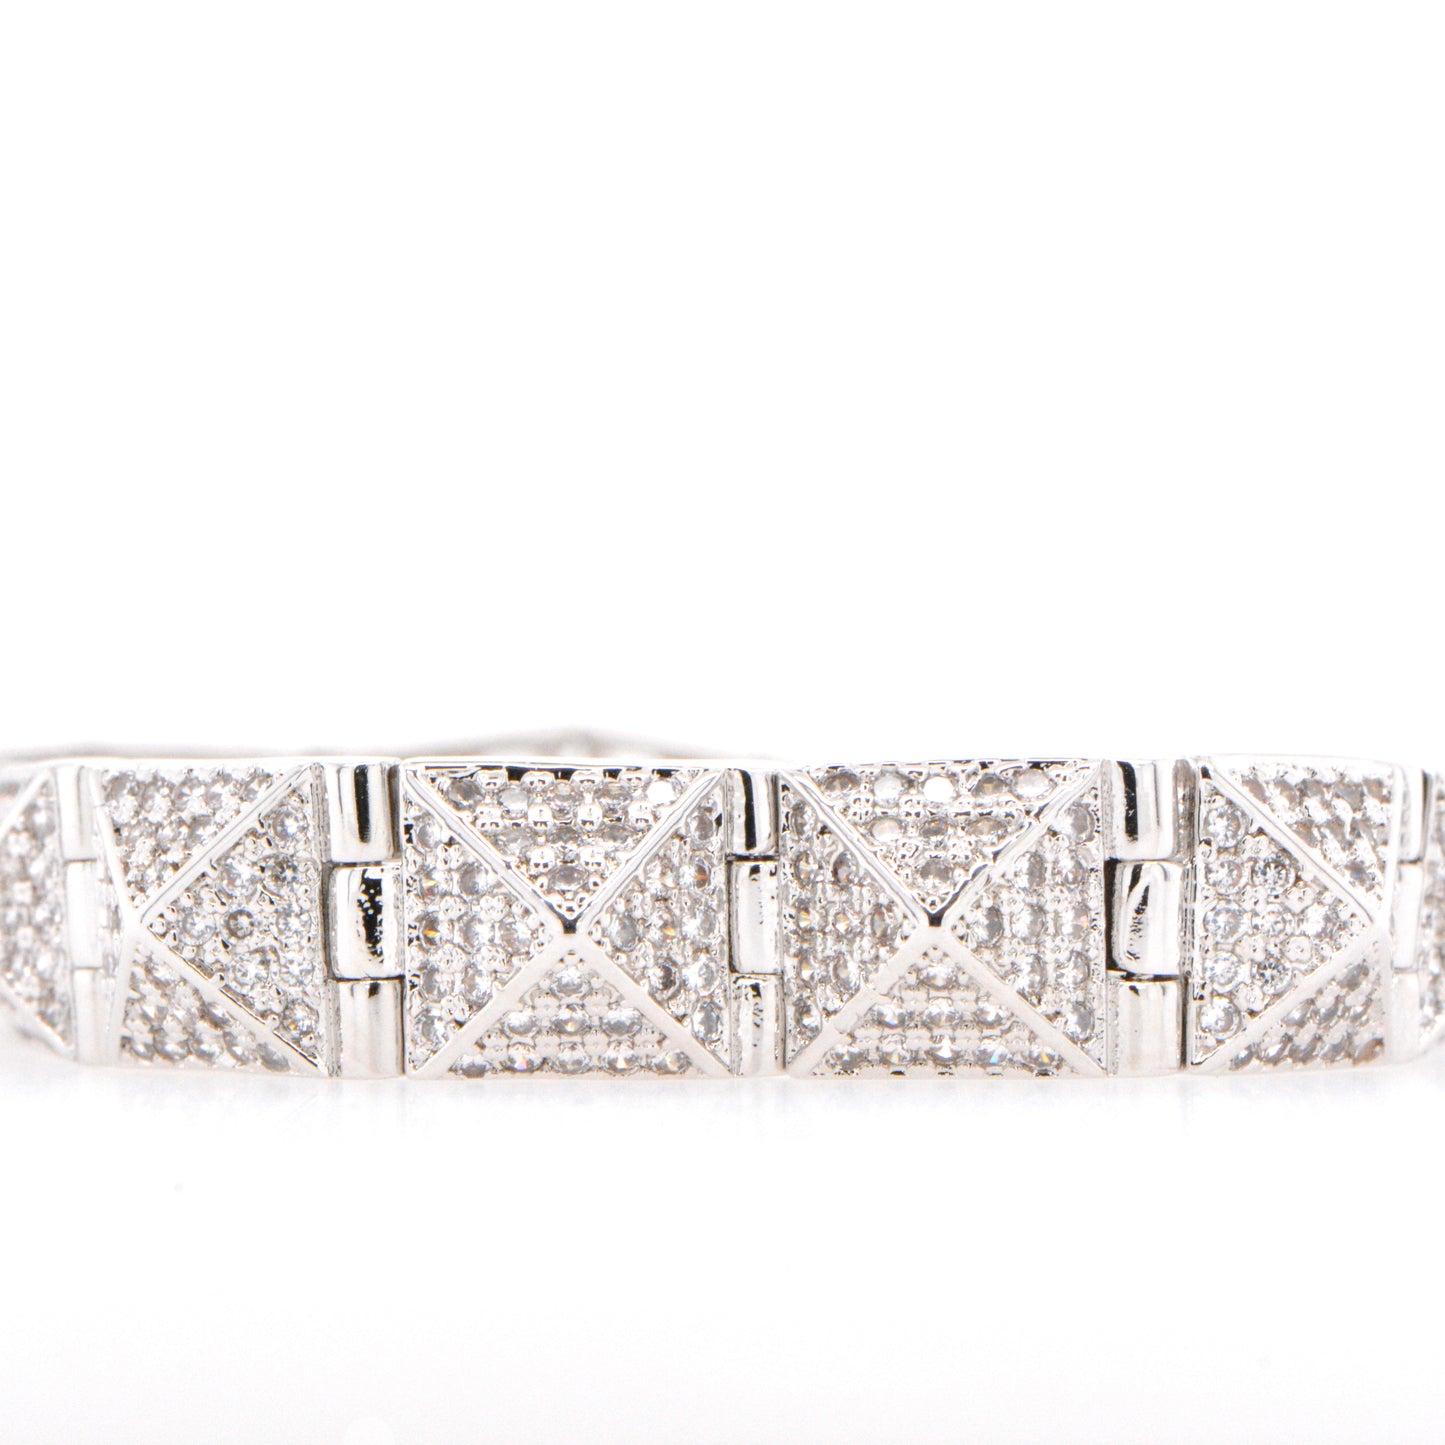 Rhodium Plated Stainless Steel Pave Cubic Zirconia Pyramid Bracelet